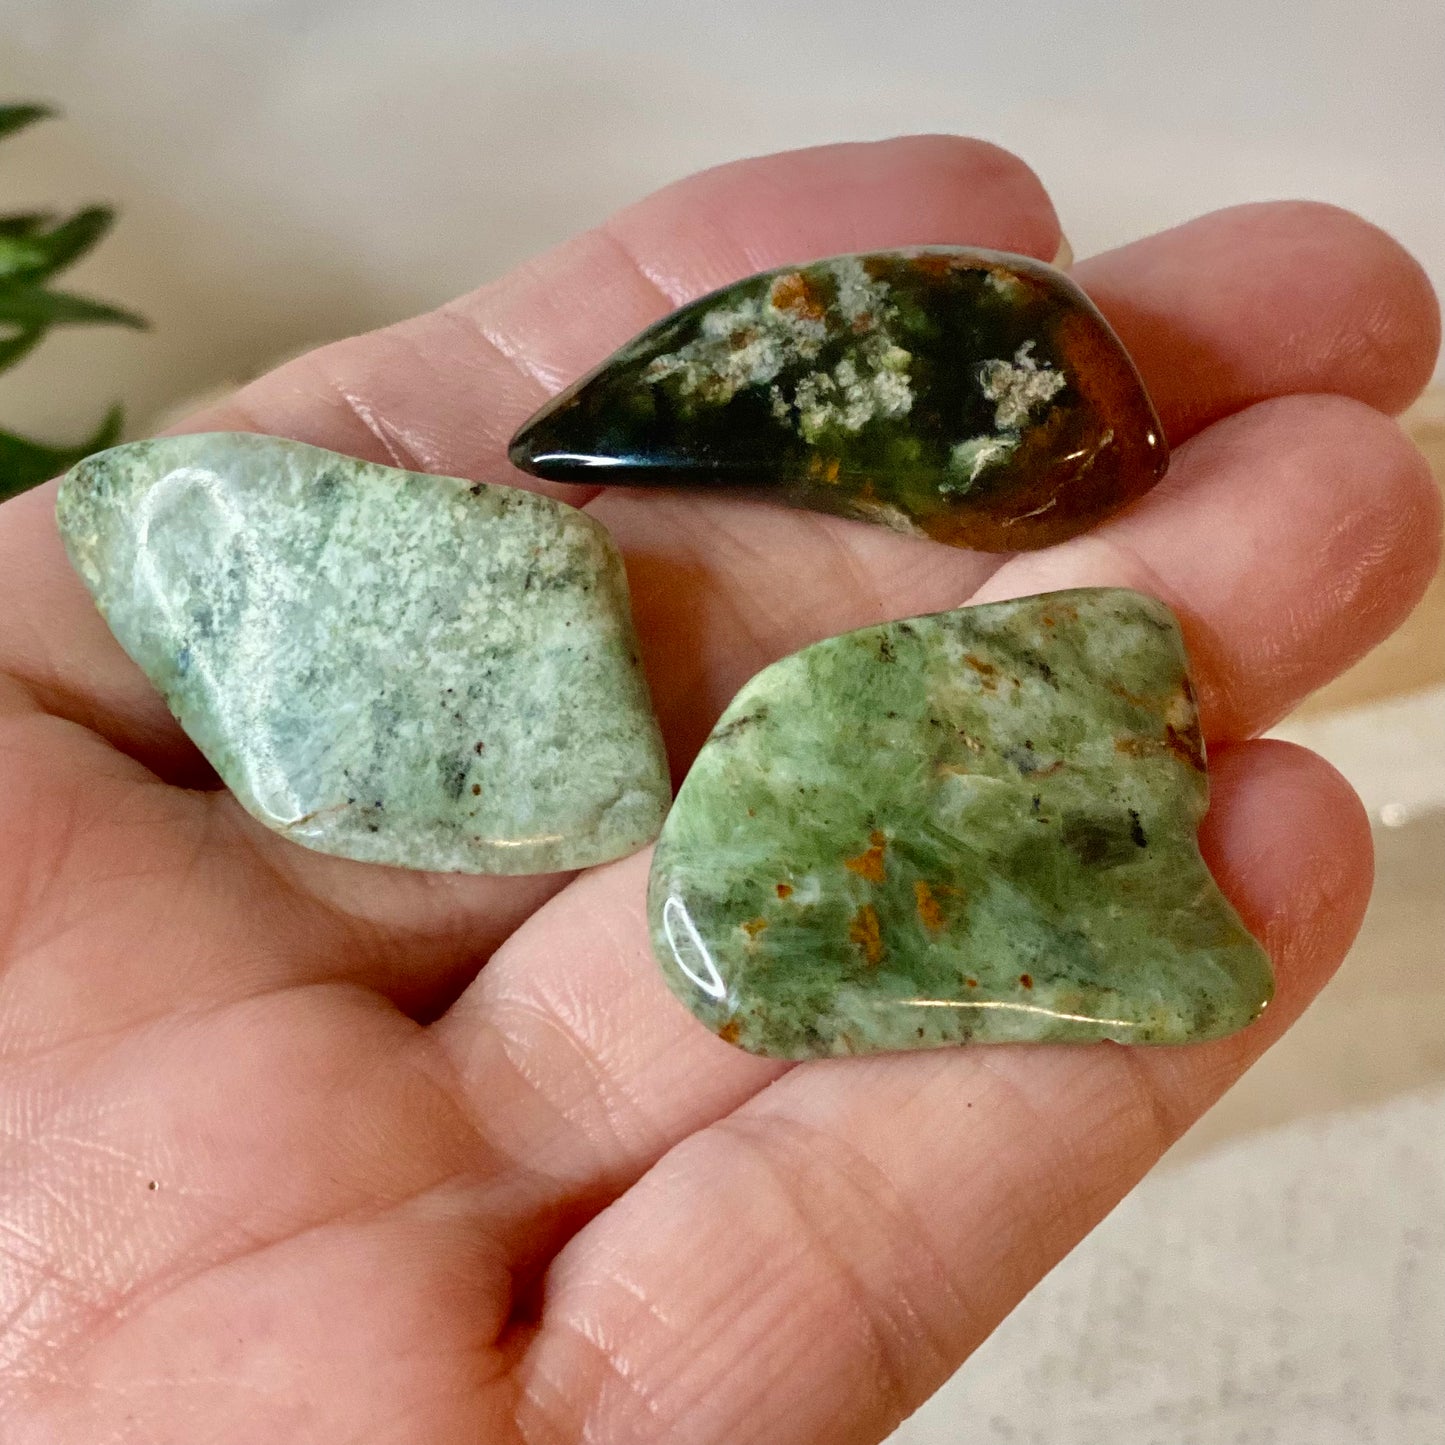 Chrysoprase Tumbled Stones from Madagascar: Nature's Green Serenity